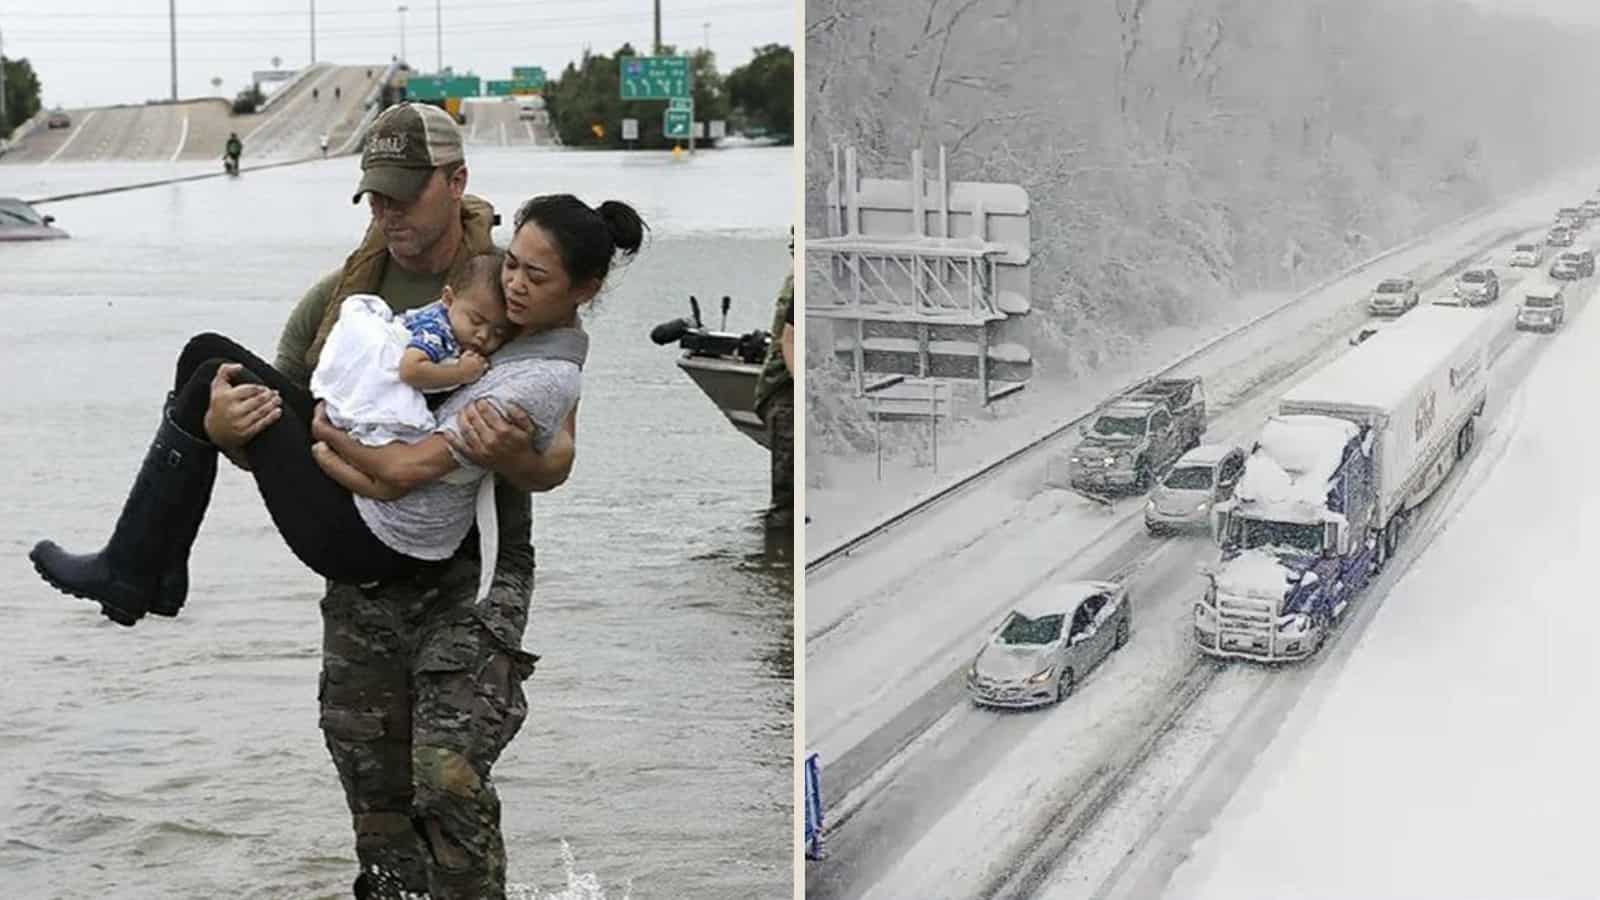 Instagrammers Tell Stories of People Who Helped Others in Extreme Weather